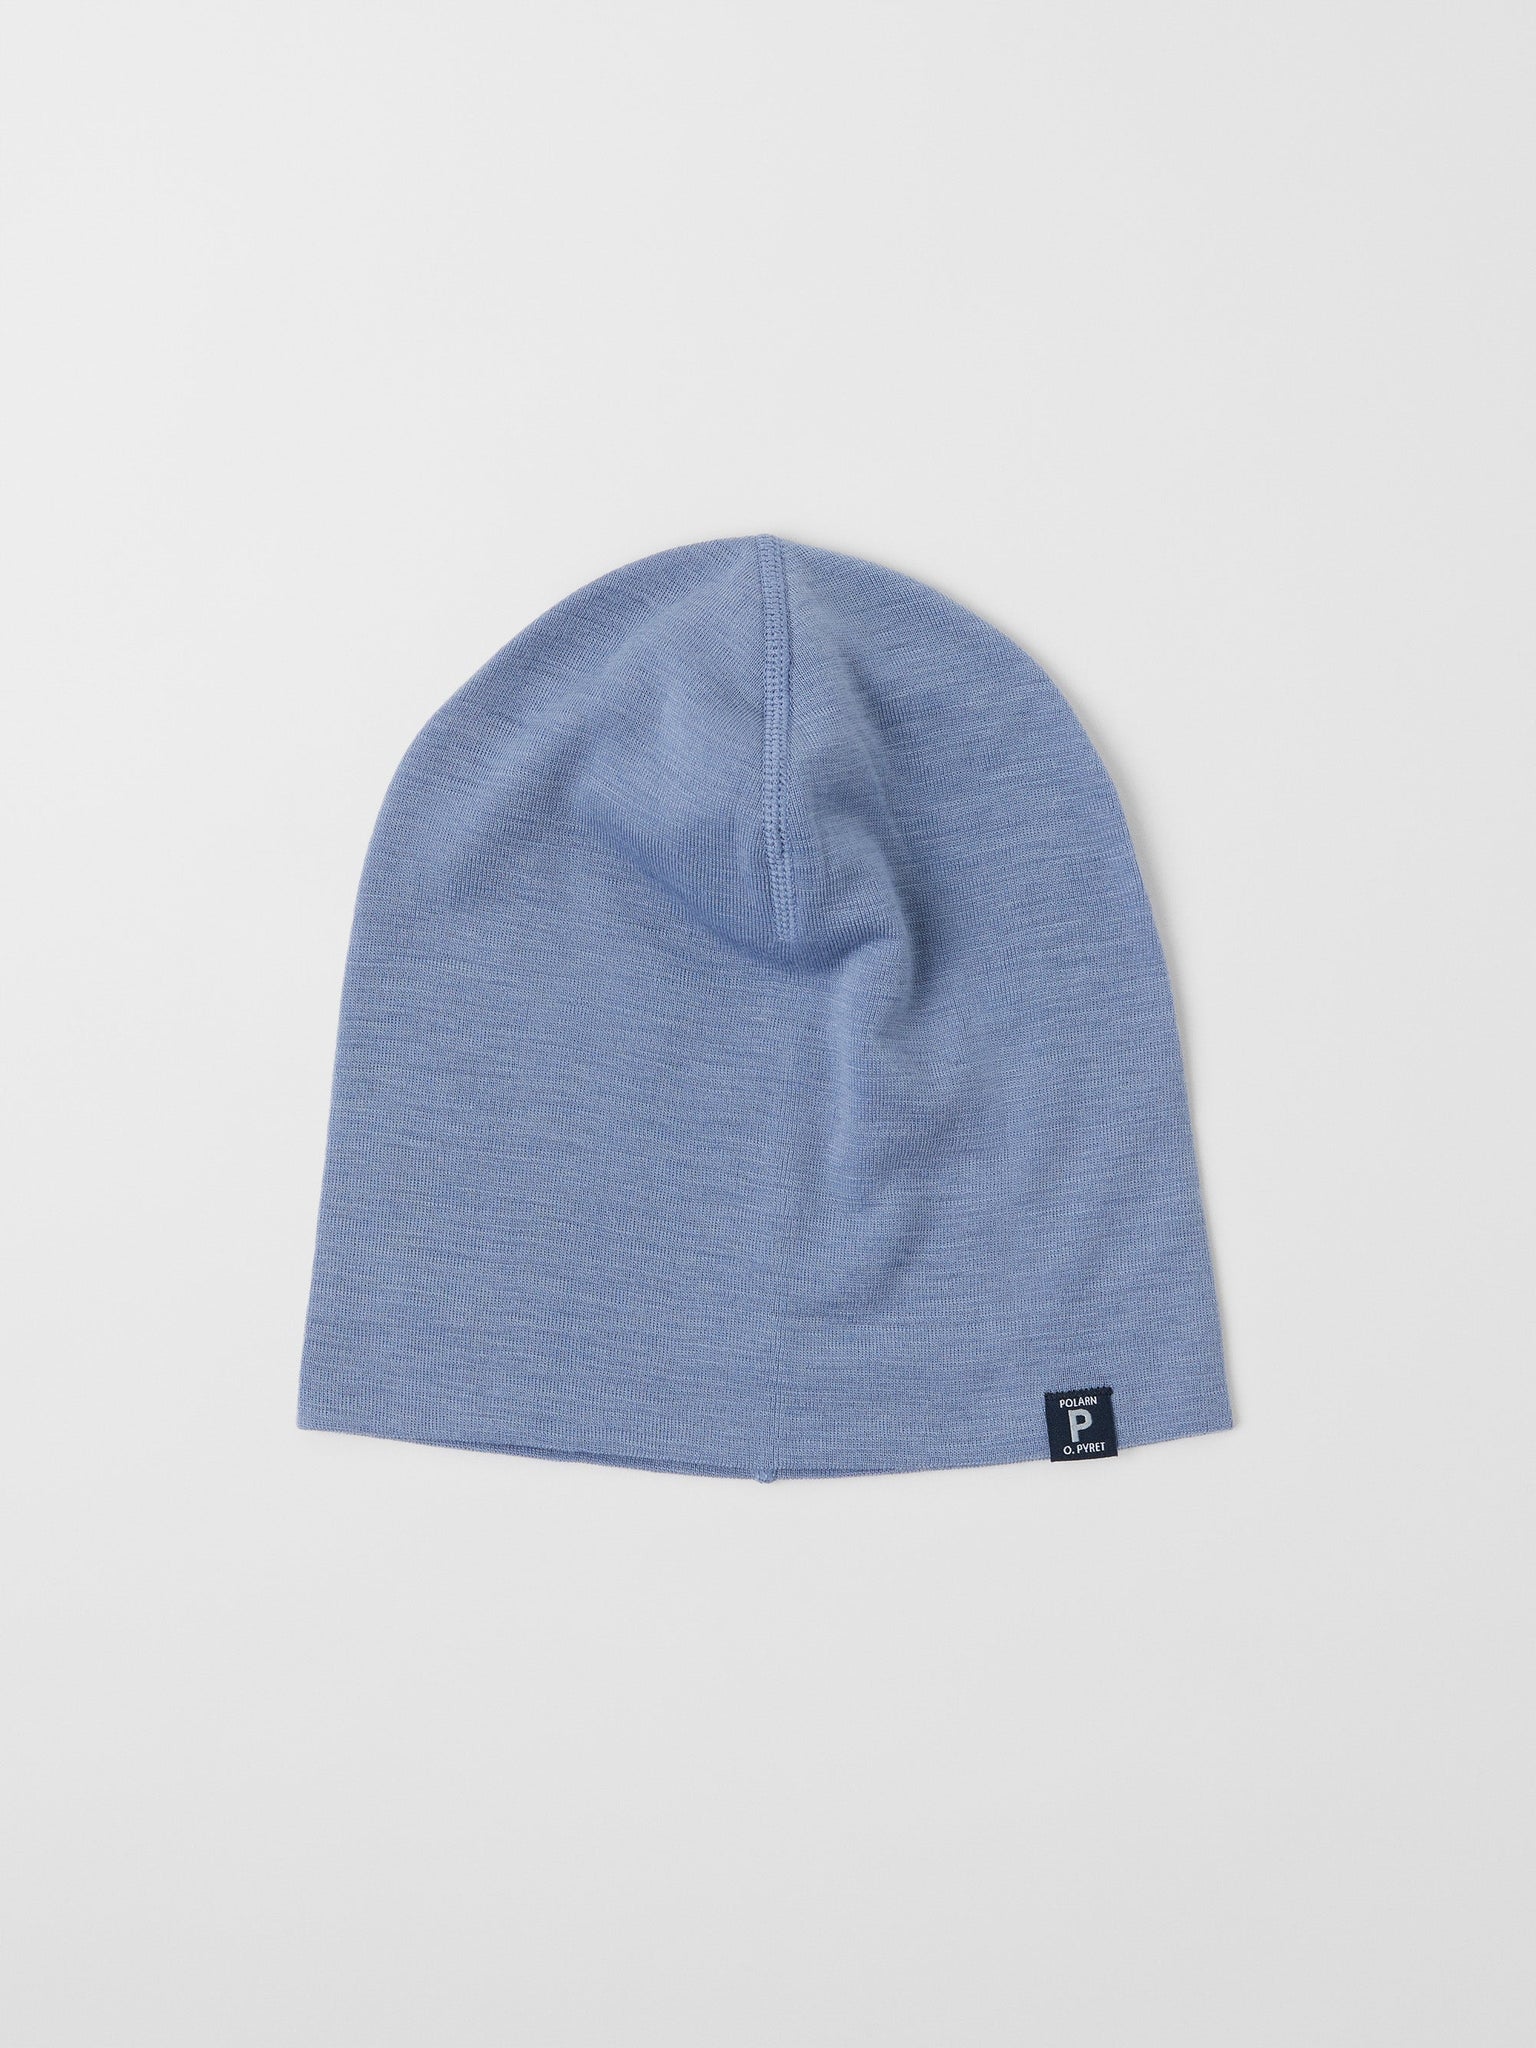 Merino Wool Blue Kids Beanie Hat from the Polarn O. Pyret outerwear collection. Made using ethically sourced materials.